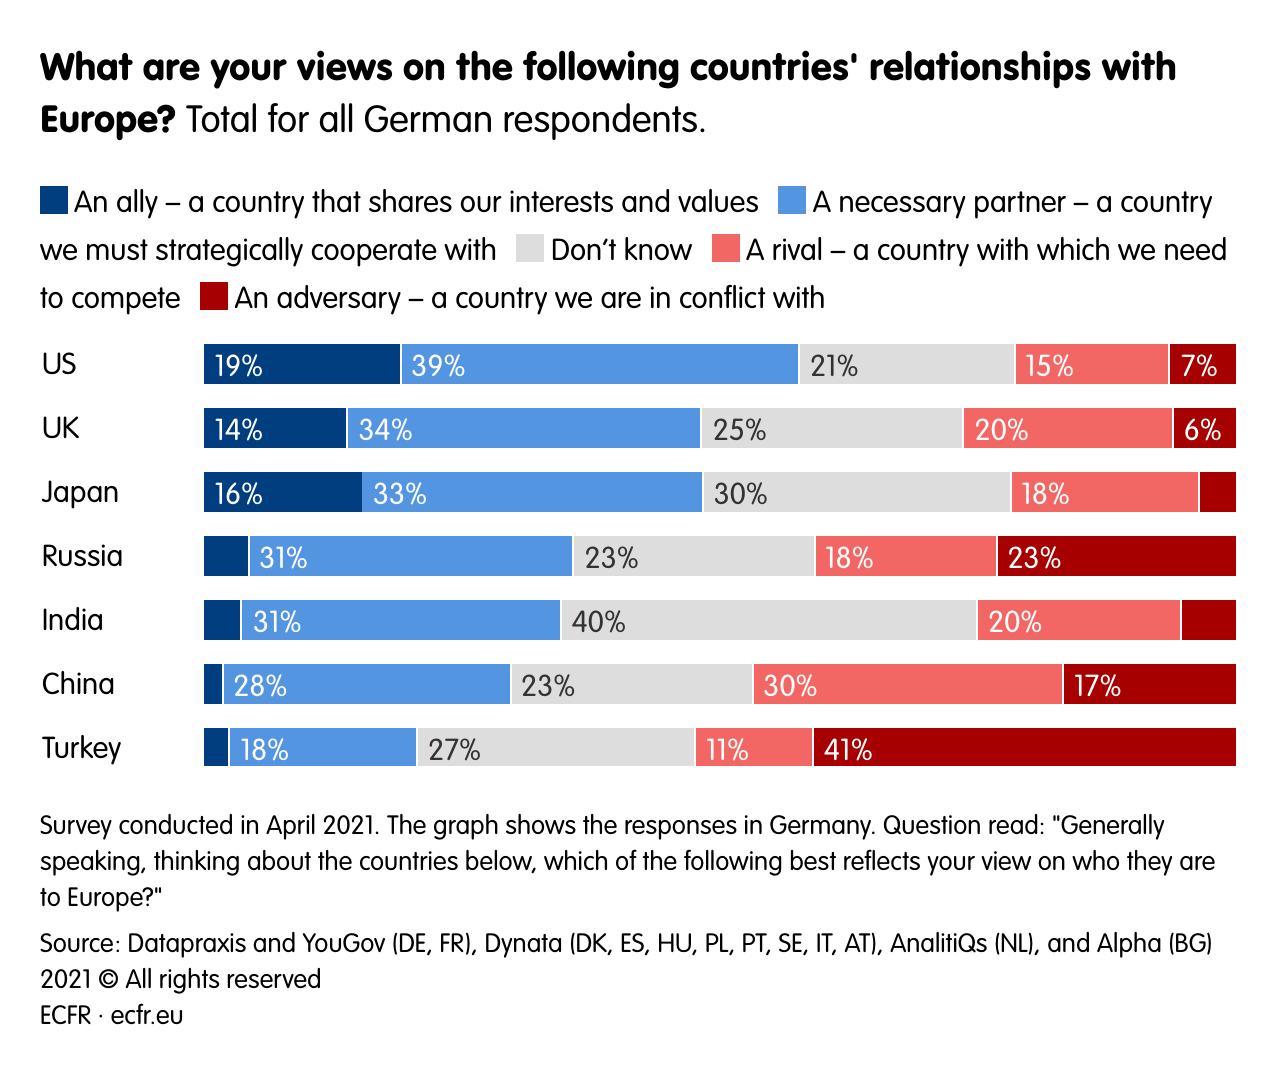 What are your views on the following countries' relationships with Europe?